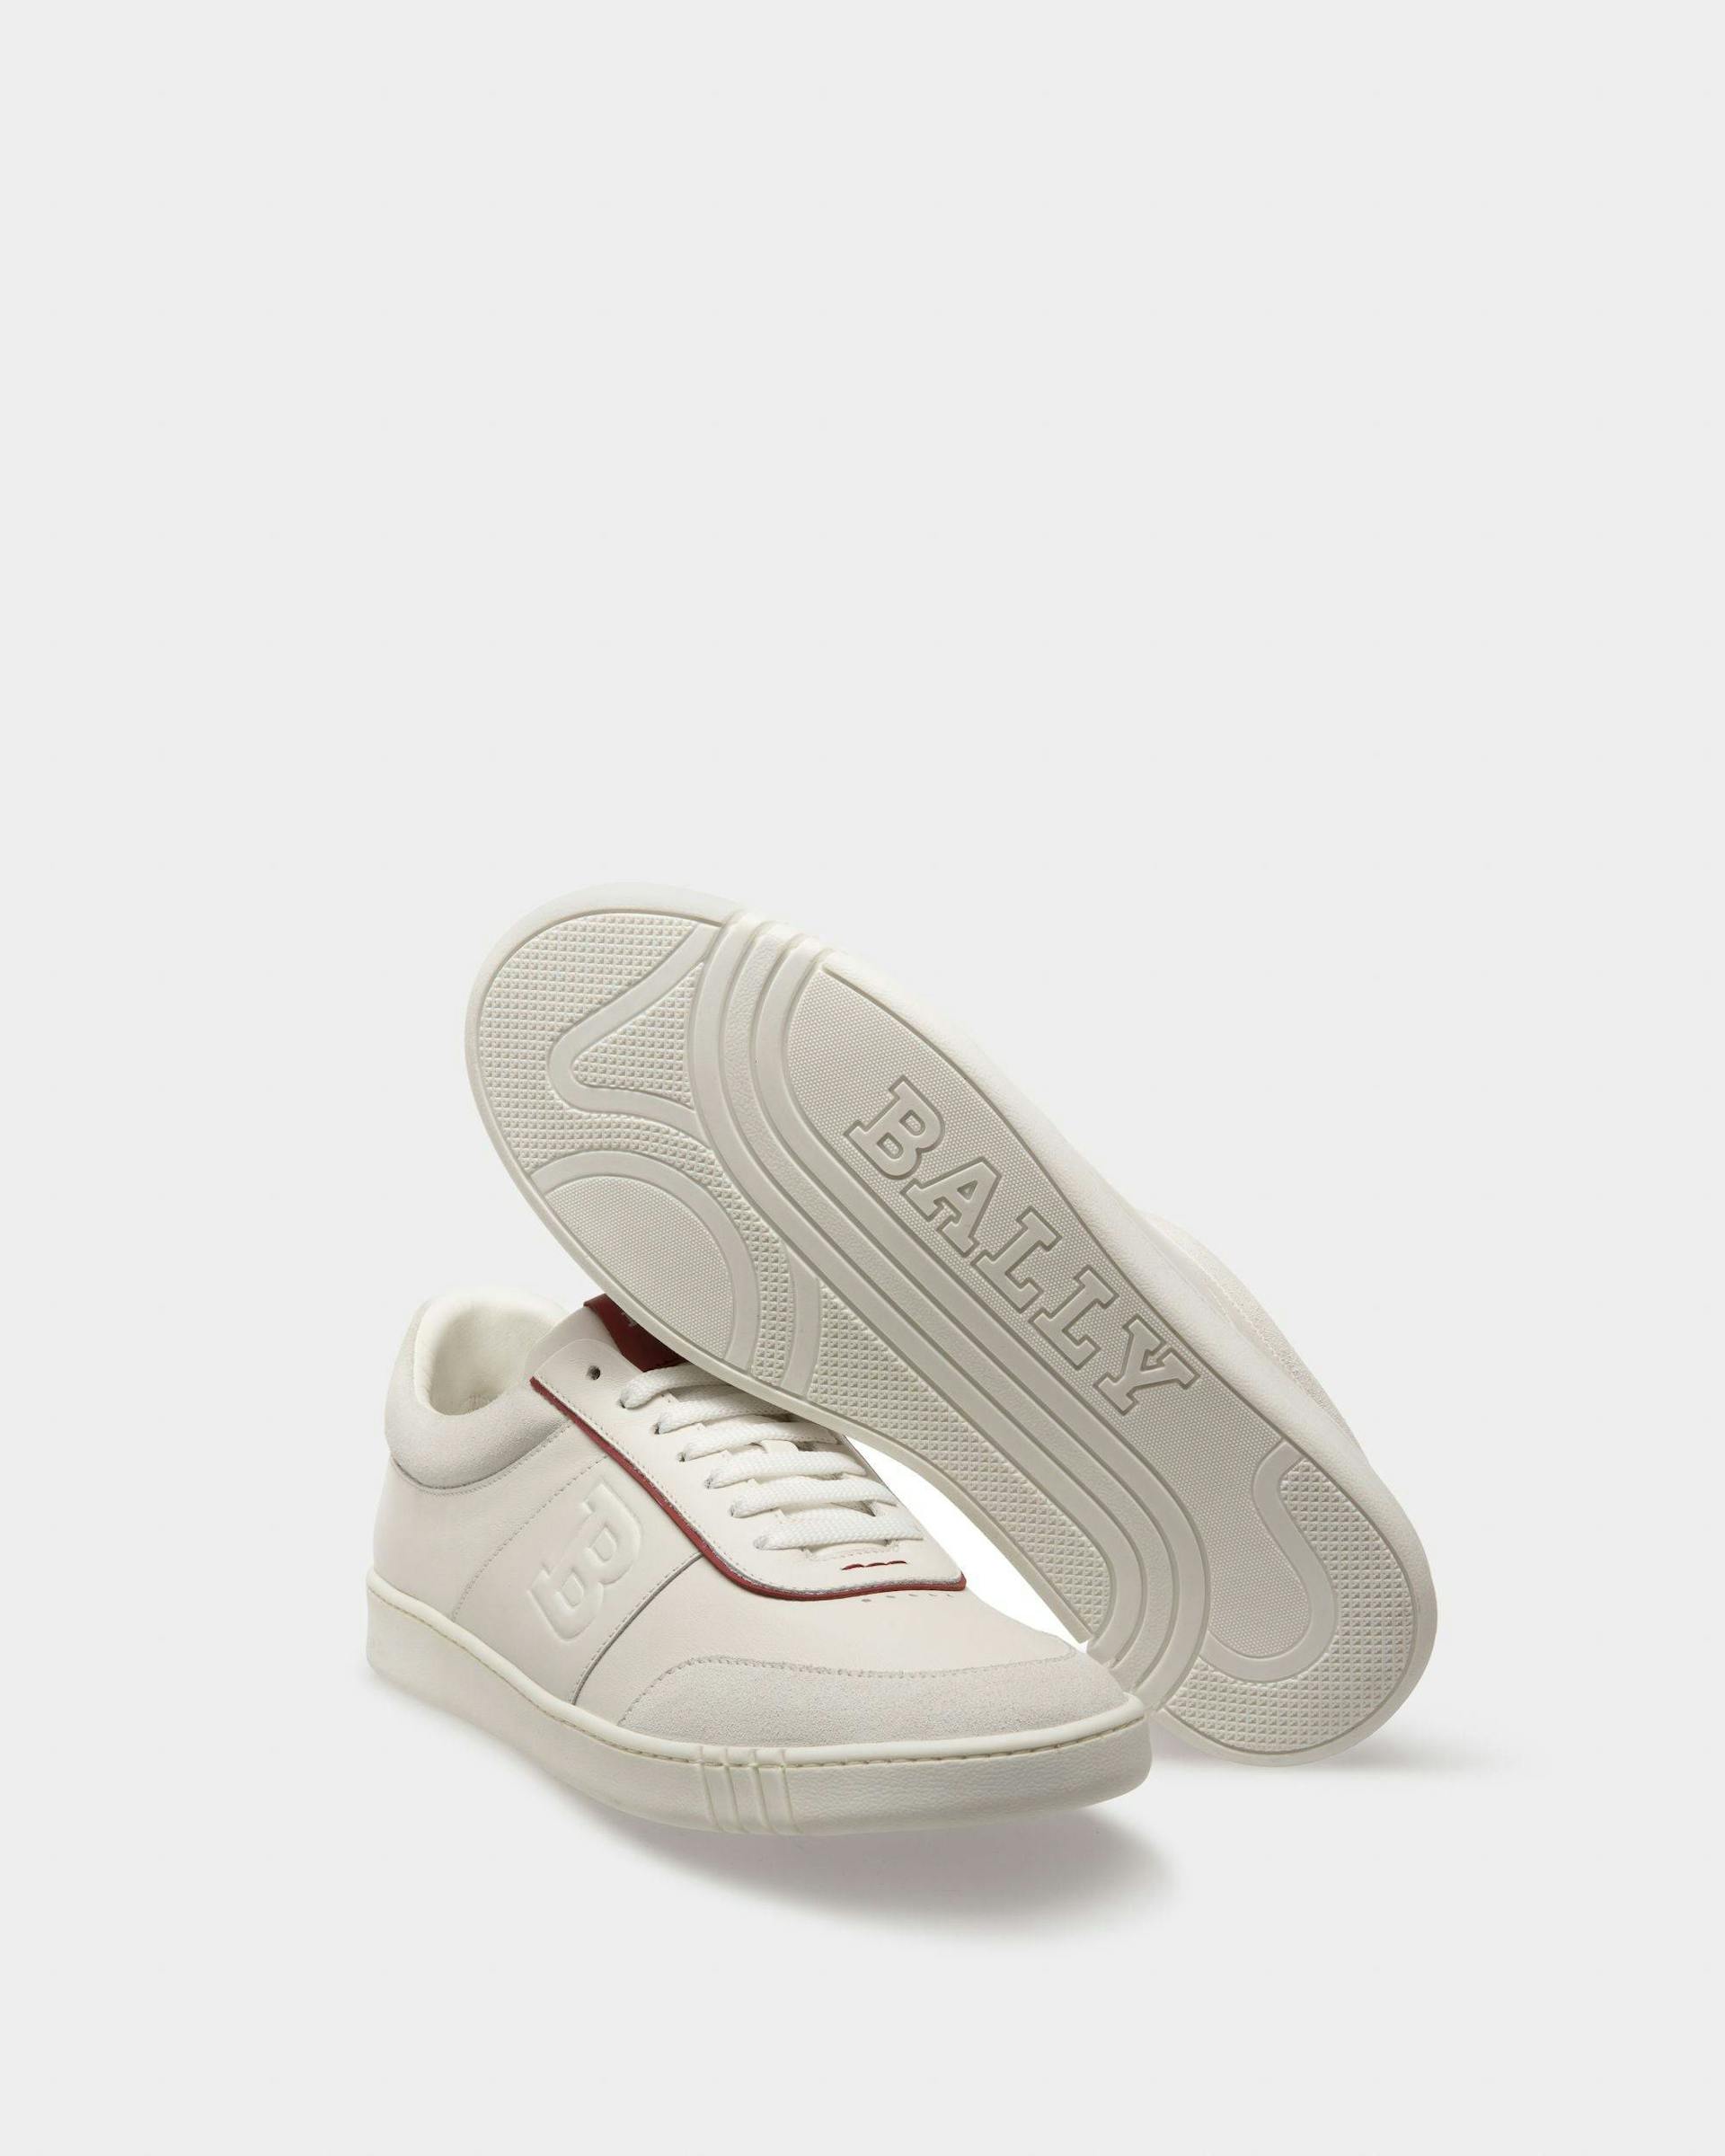 Wallys Leather And Suede Sneaker In White And Red - Men's - Bally - 05